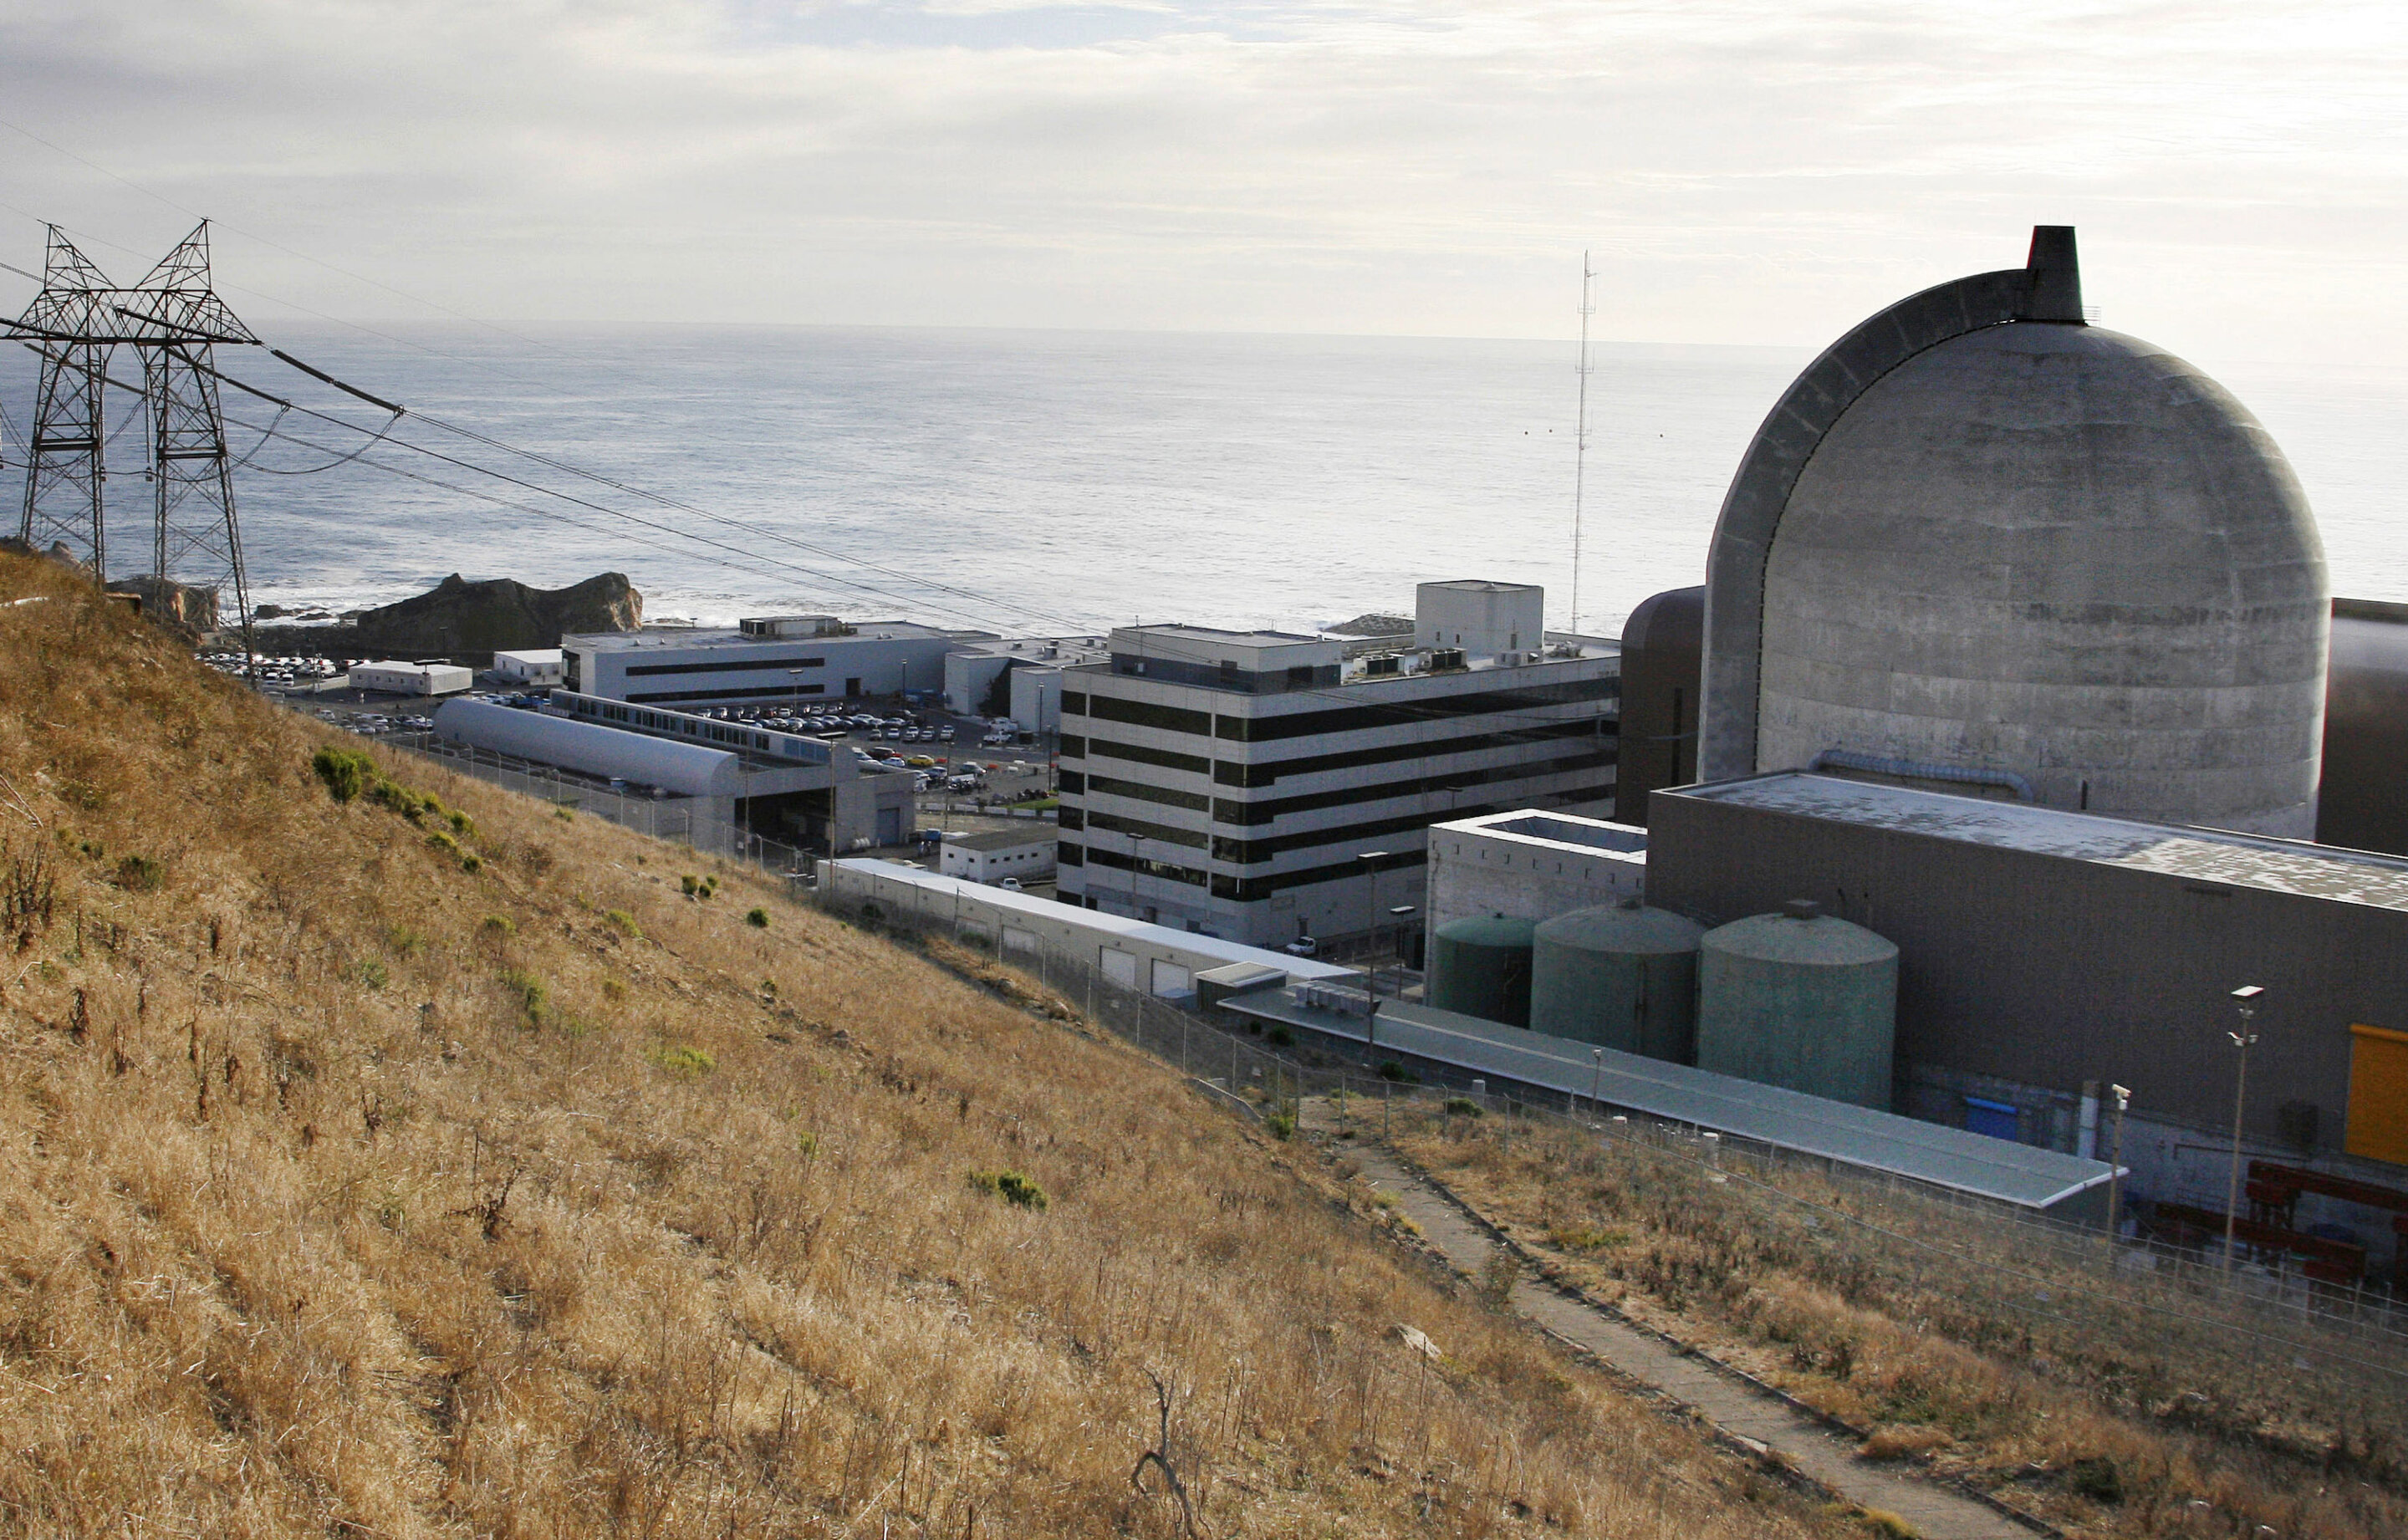 #California governor signs bill to keep last reactors running